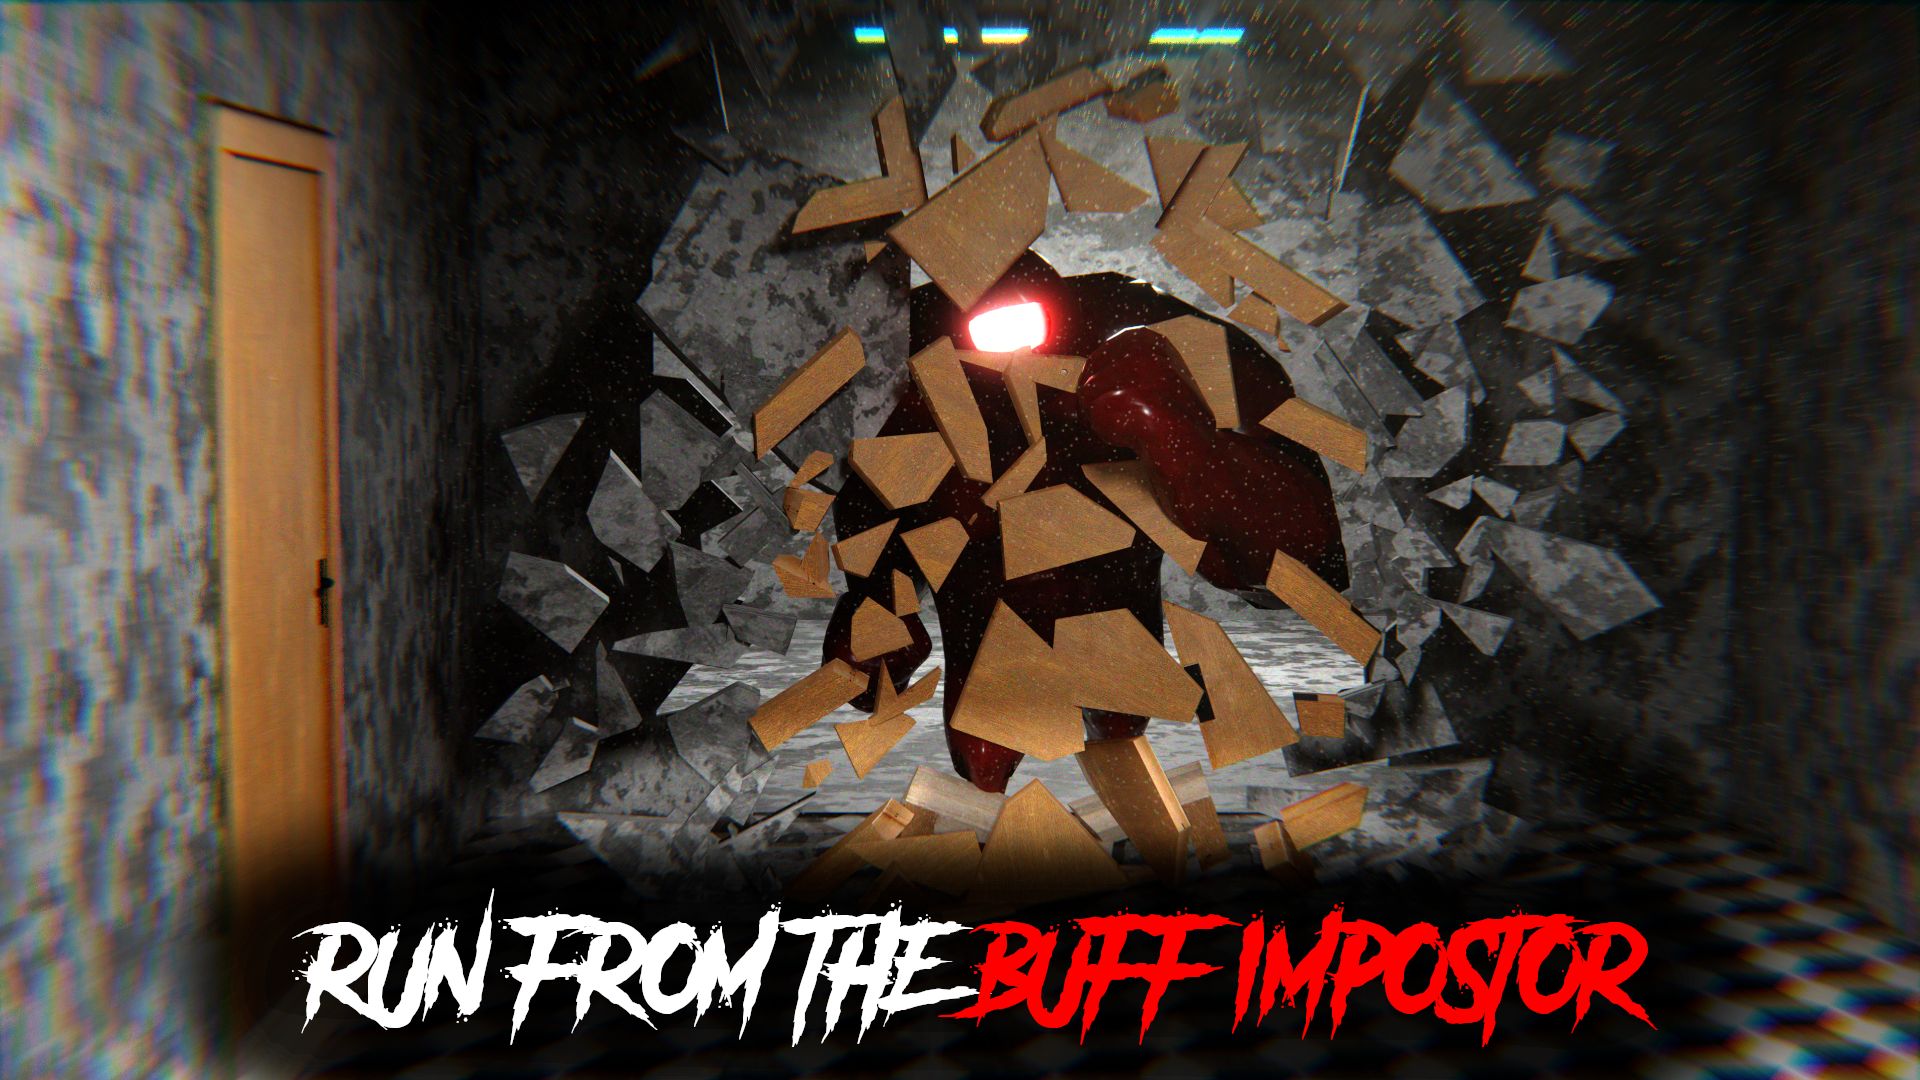 Download Buff Imposter Scary Creepy Horror für Android kostenlos.